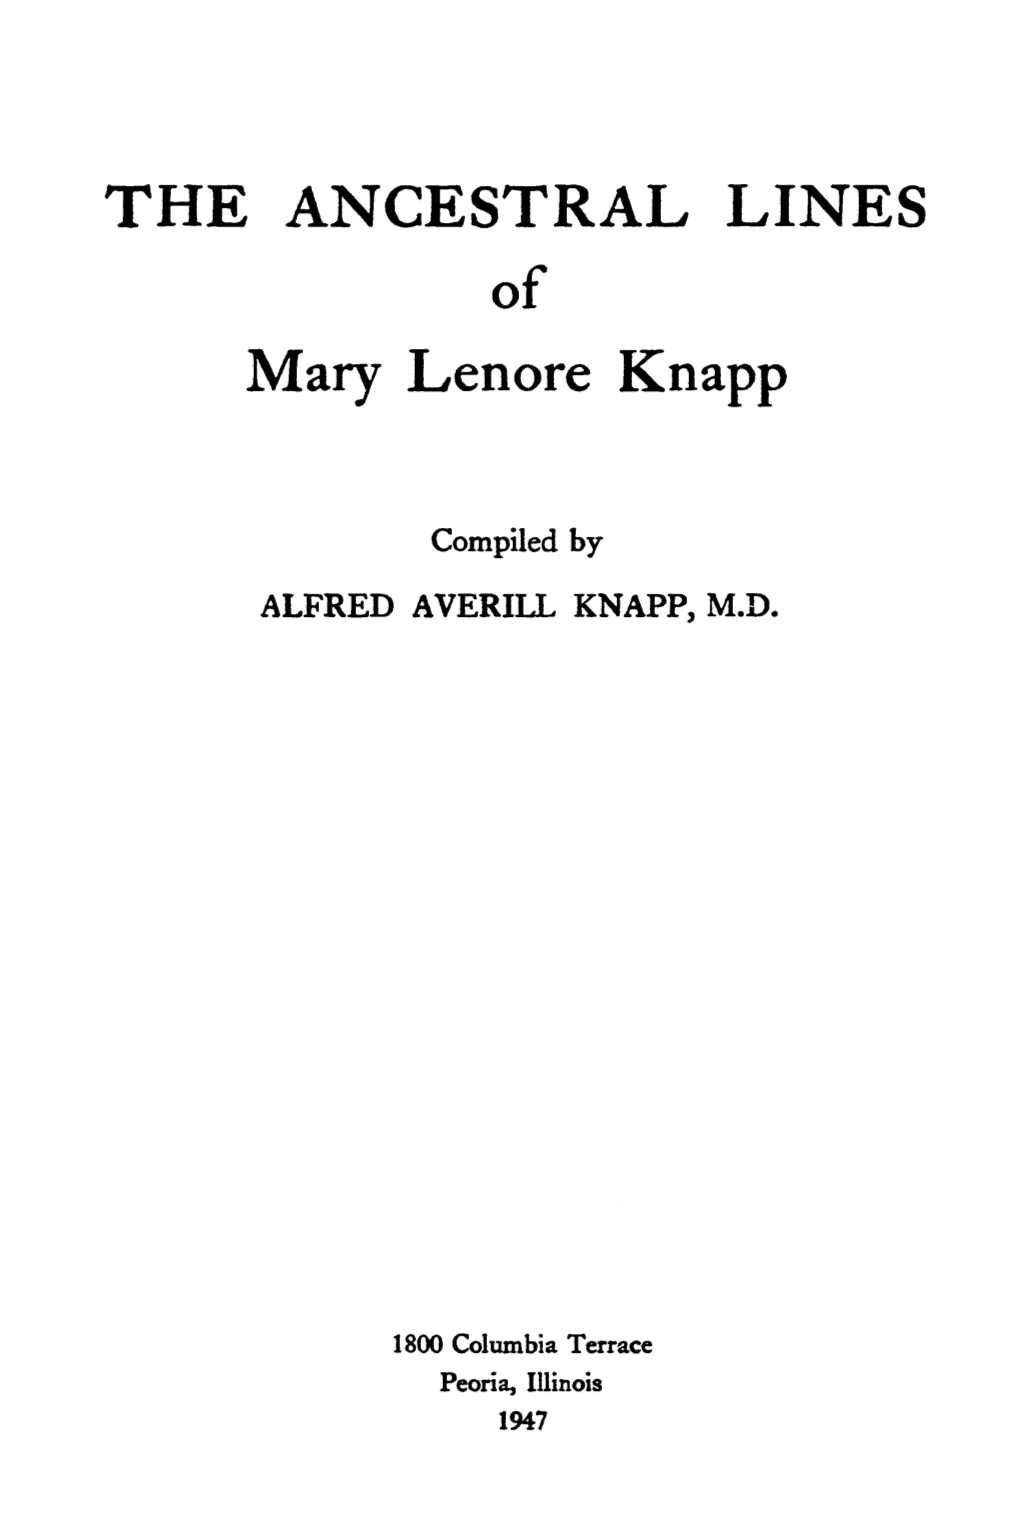 THE ANCESTRAL LINES of Mary Lenore Knapp